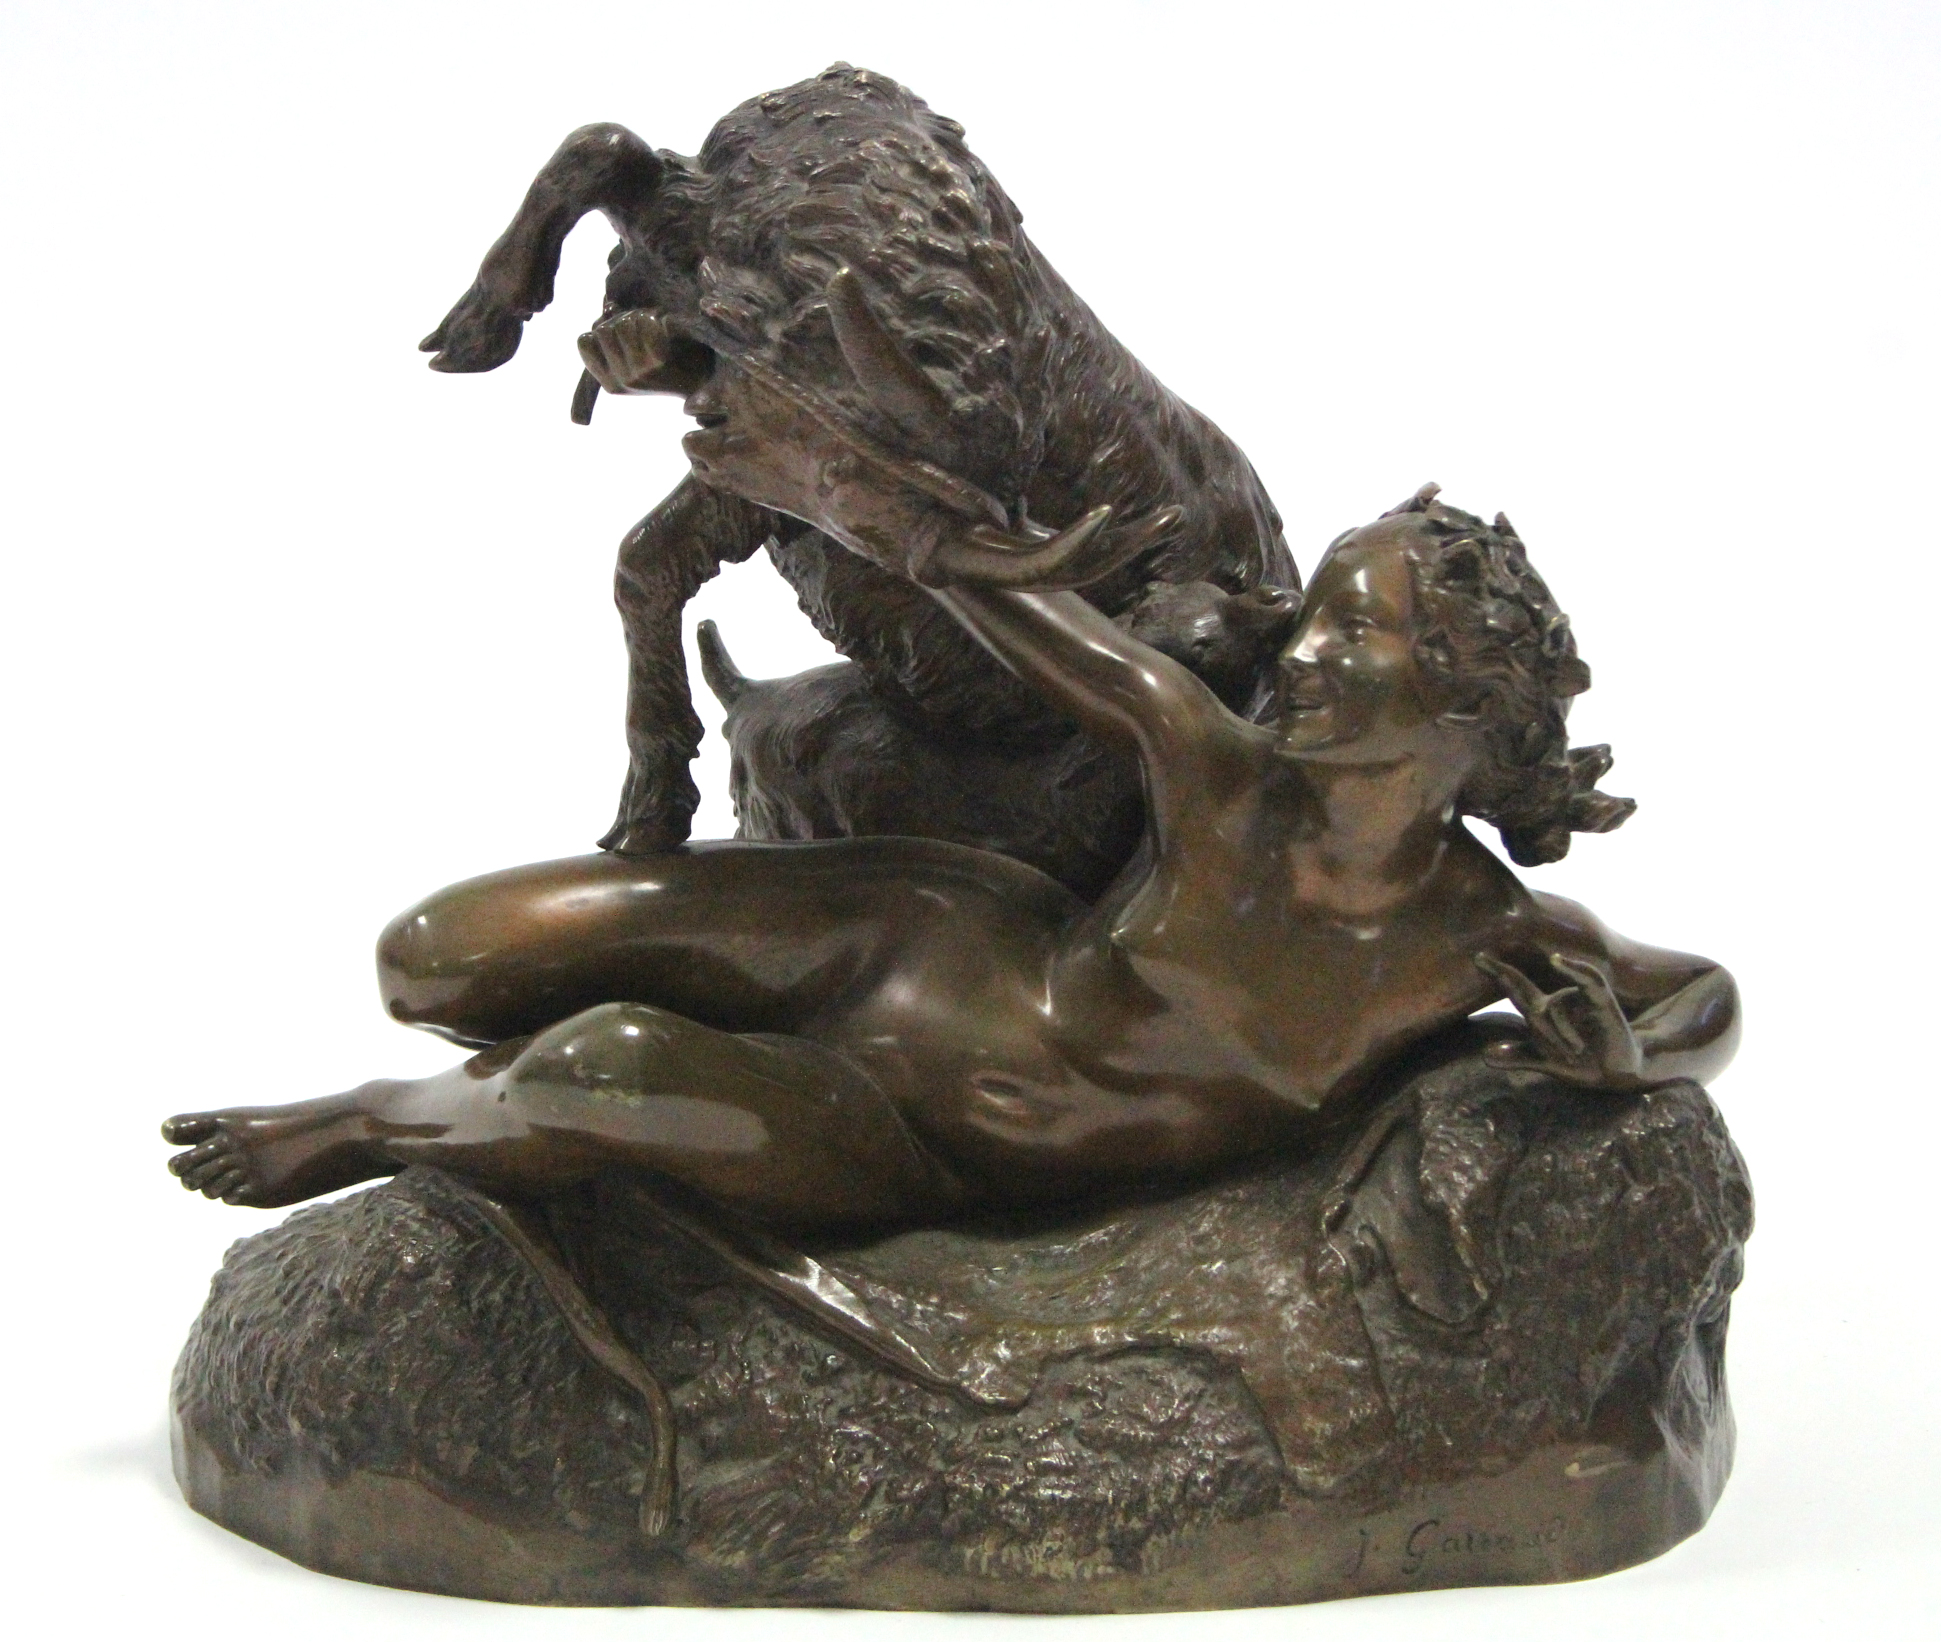 GAREAUD, J. A bronze group of a nude female figure reclining on an animal skin, a goat & kid